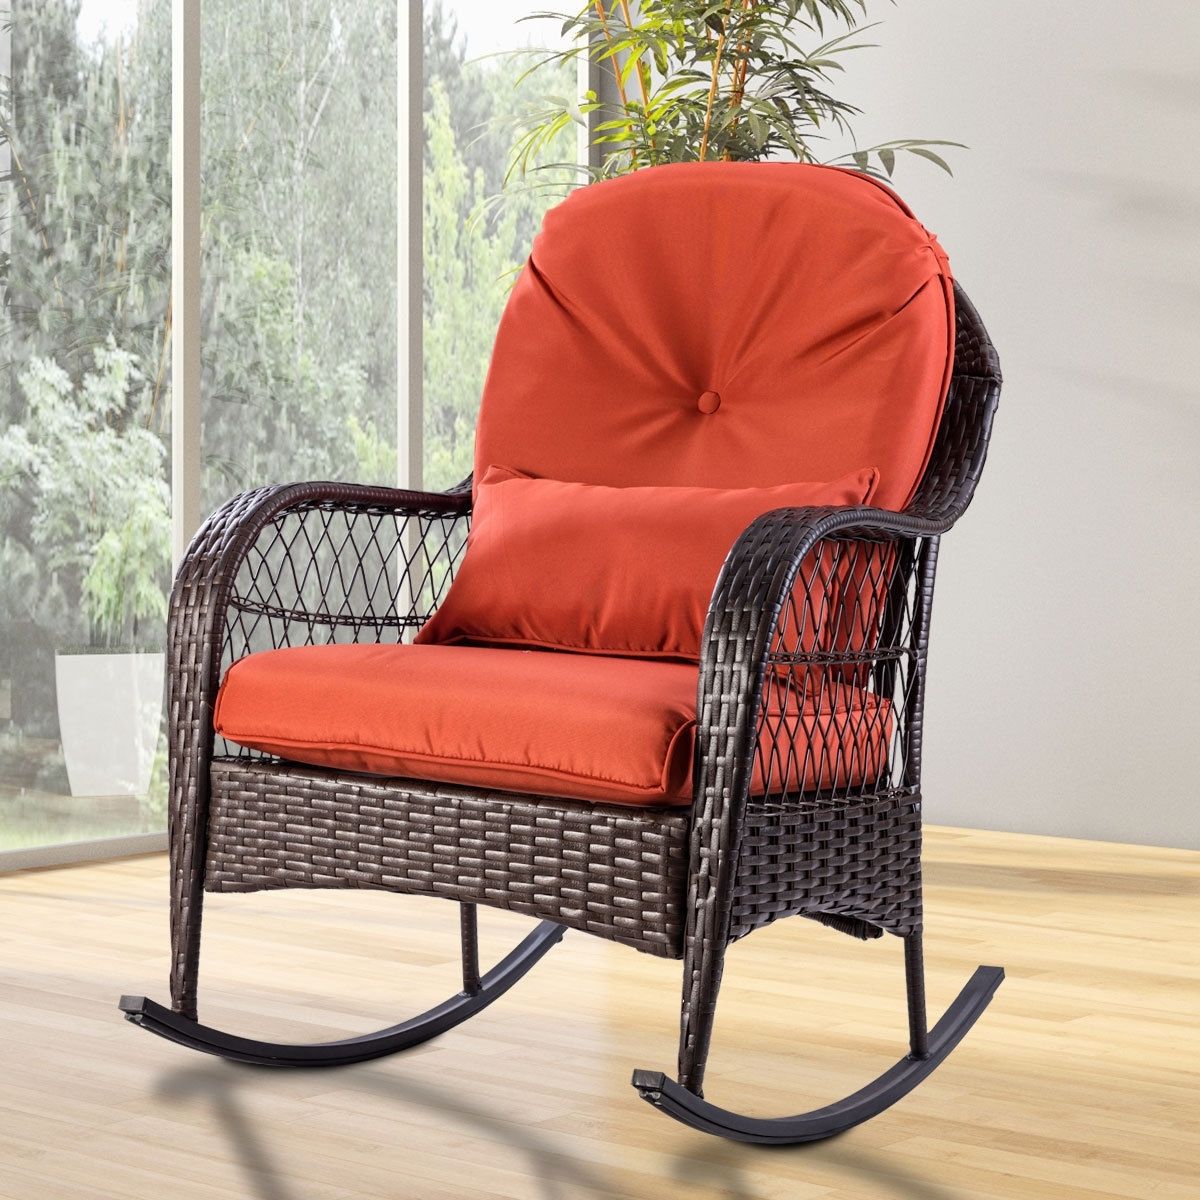 15 Ideas of Padded Patio Rocking Chairs